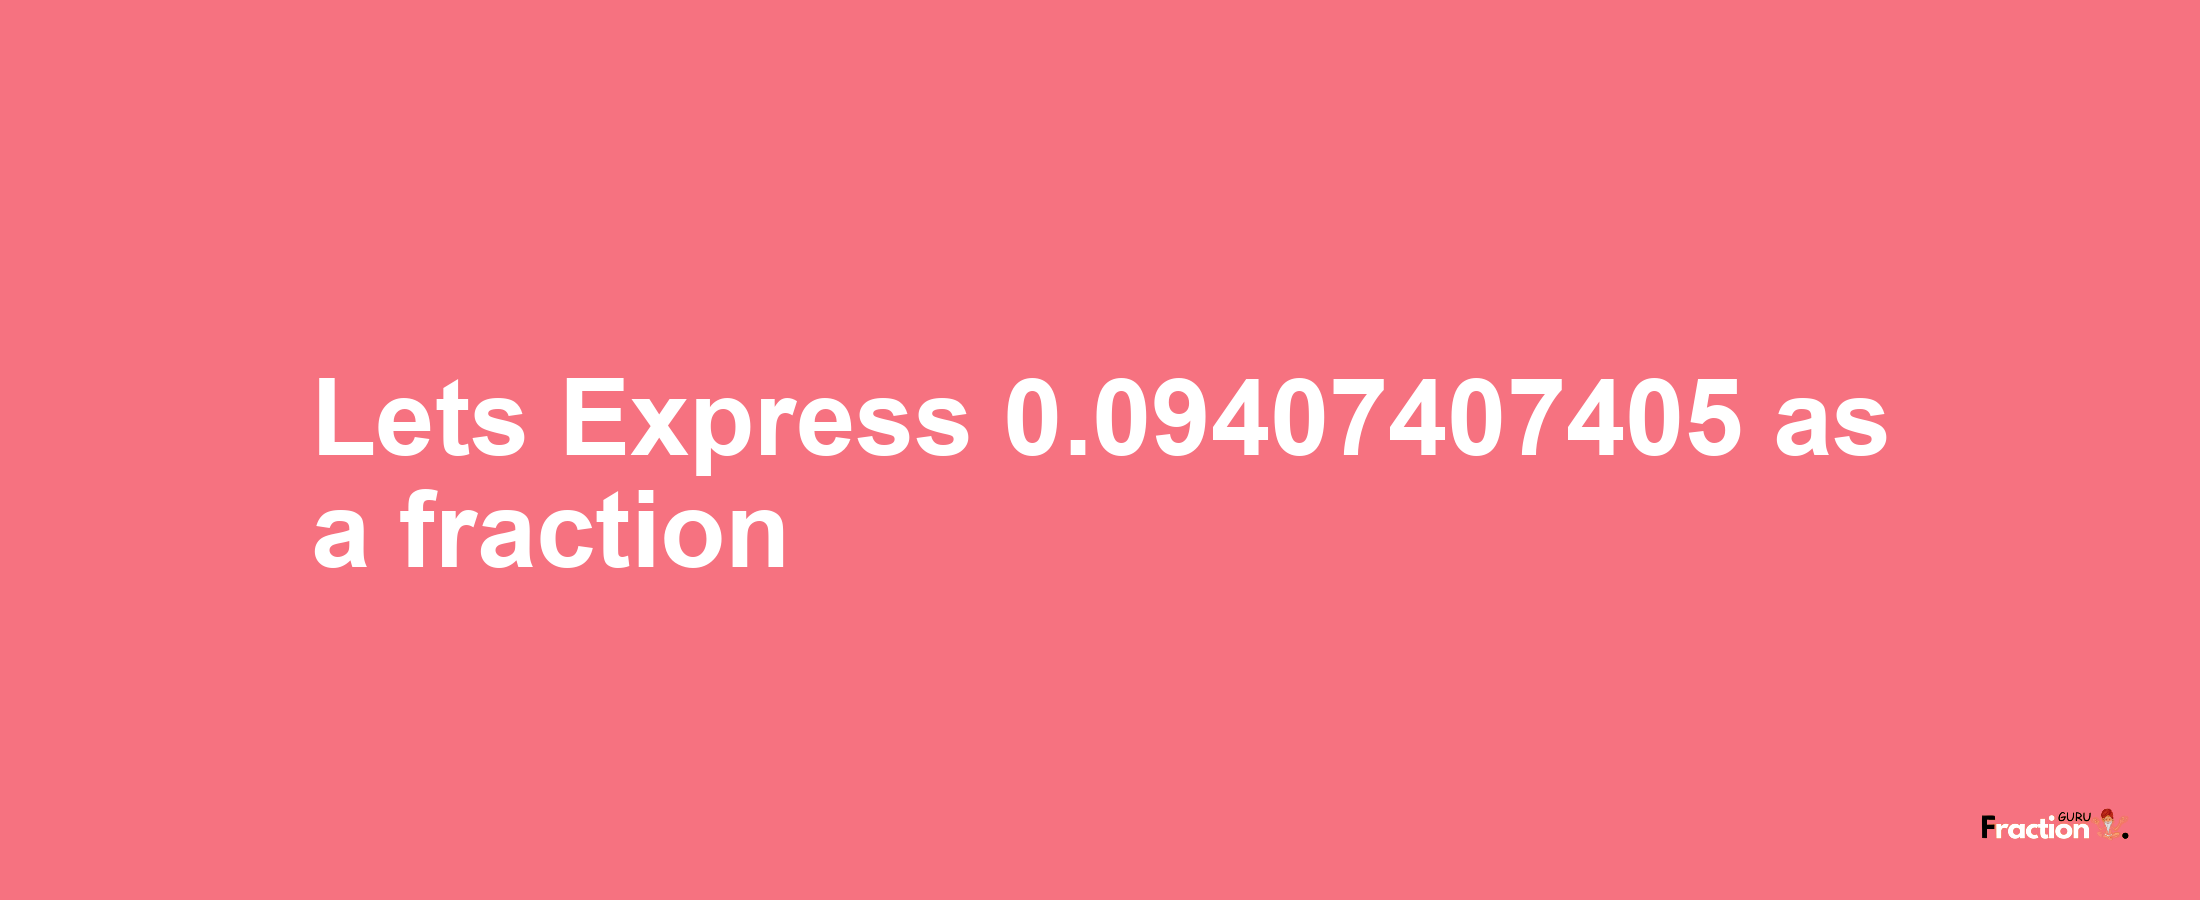 Lets Express 0.09407407405 as afraction